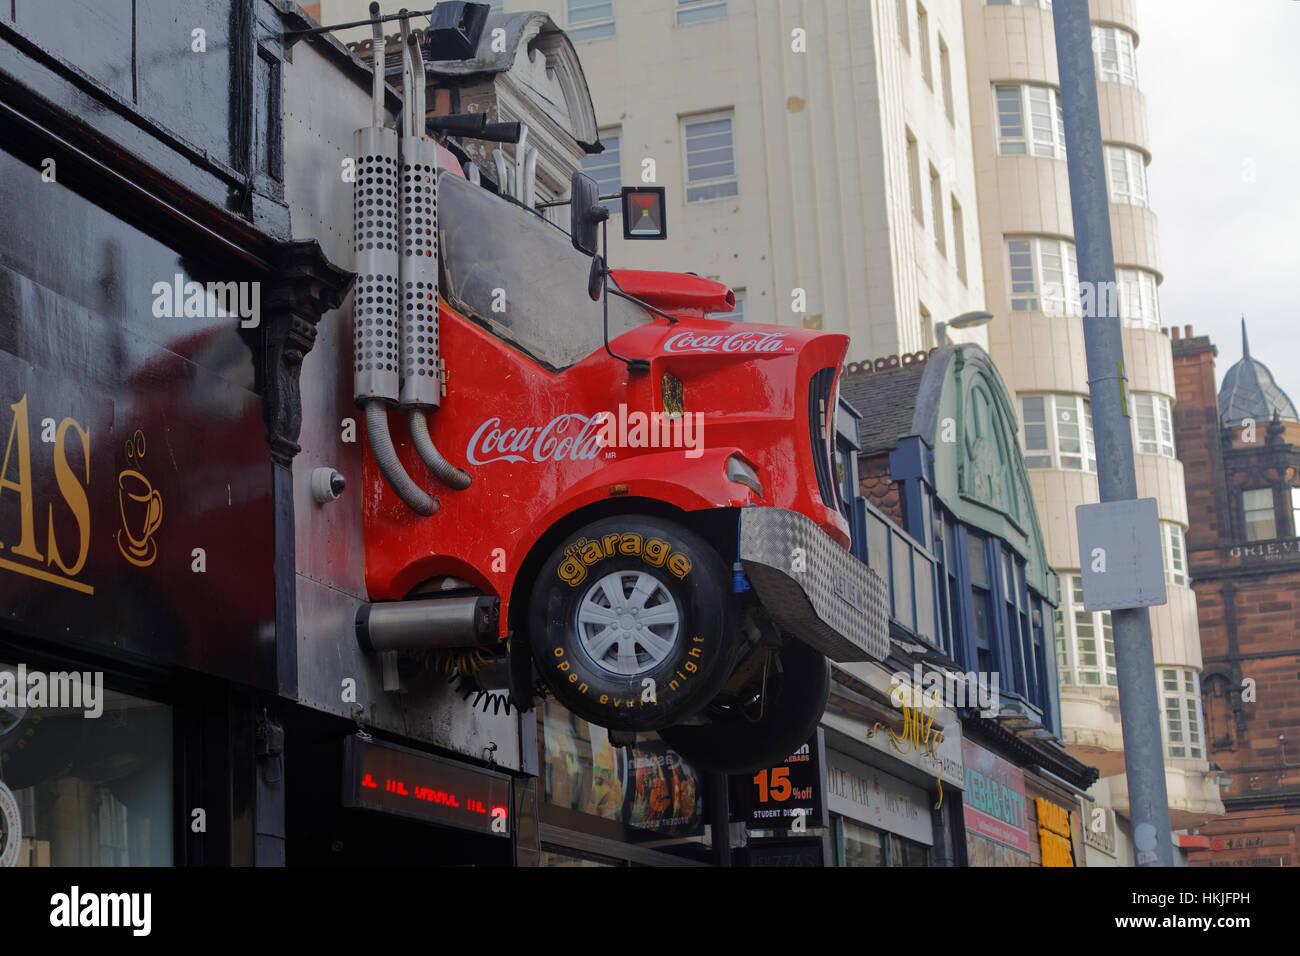 garage nightclub on sauchiehall street has replica of the coca cola Christmas truck above its doorway mounted on the wall Stock Photo